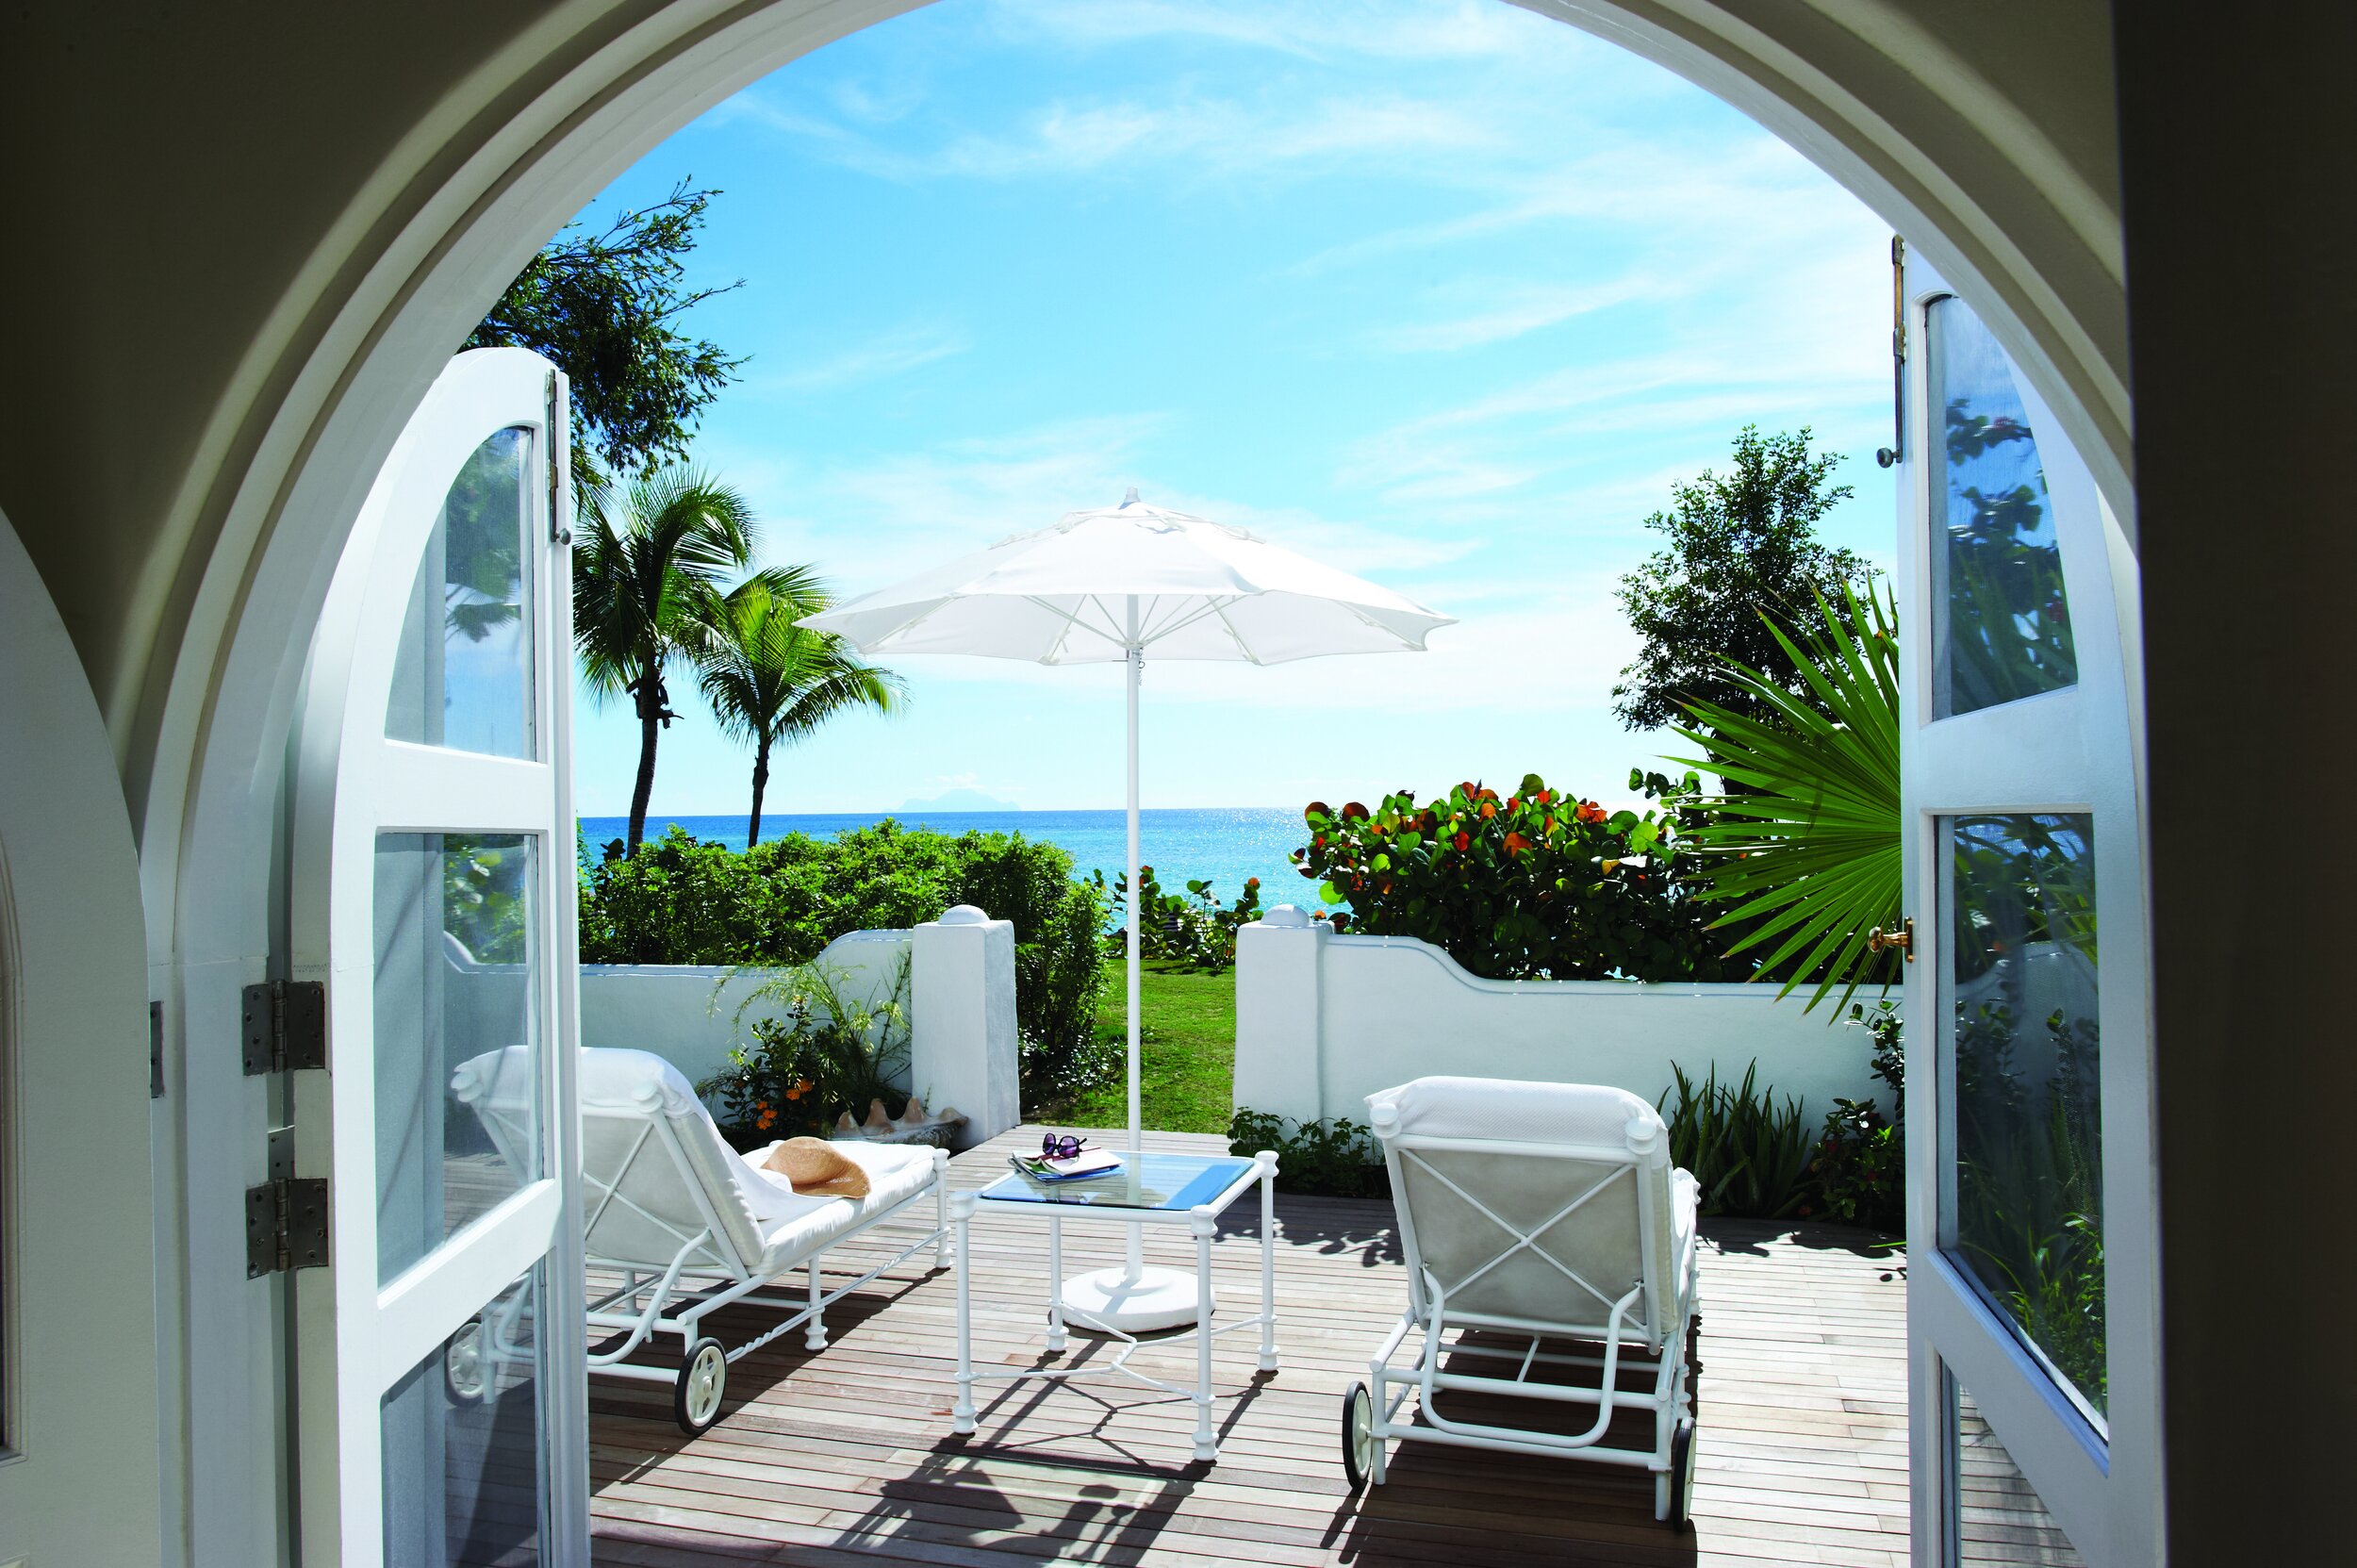   View of the sea from a guest room’s private terrace (photo credit: Belmond)  